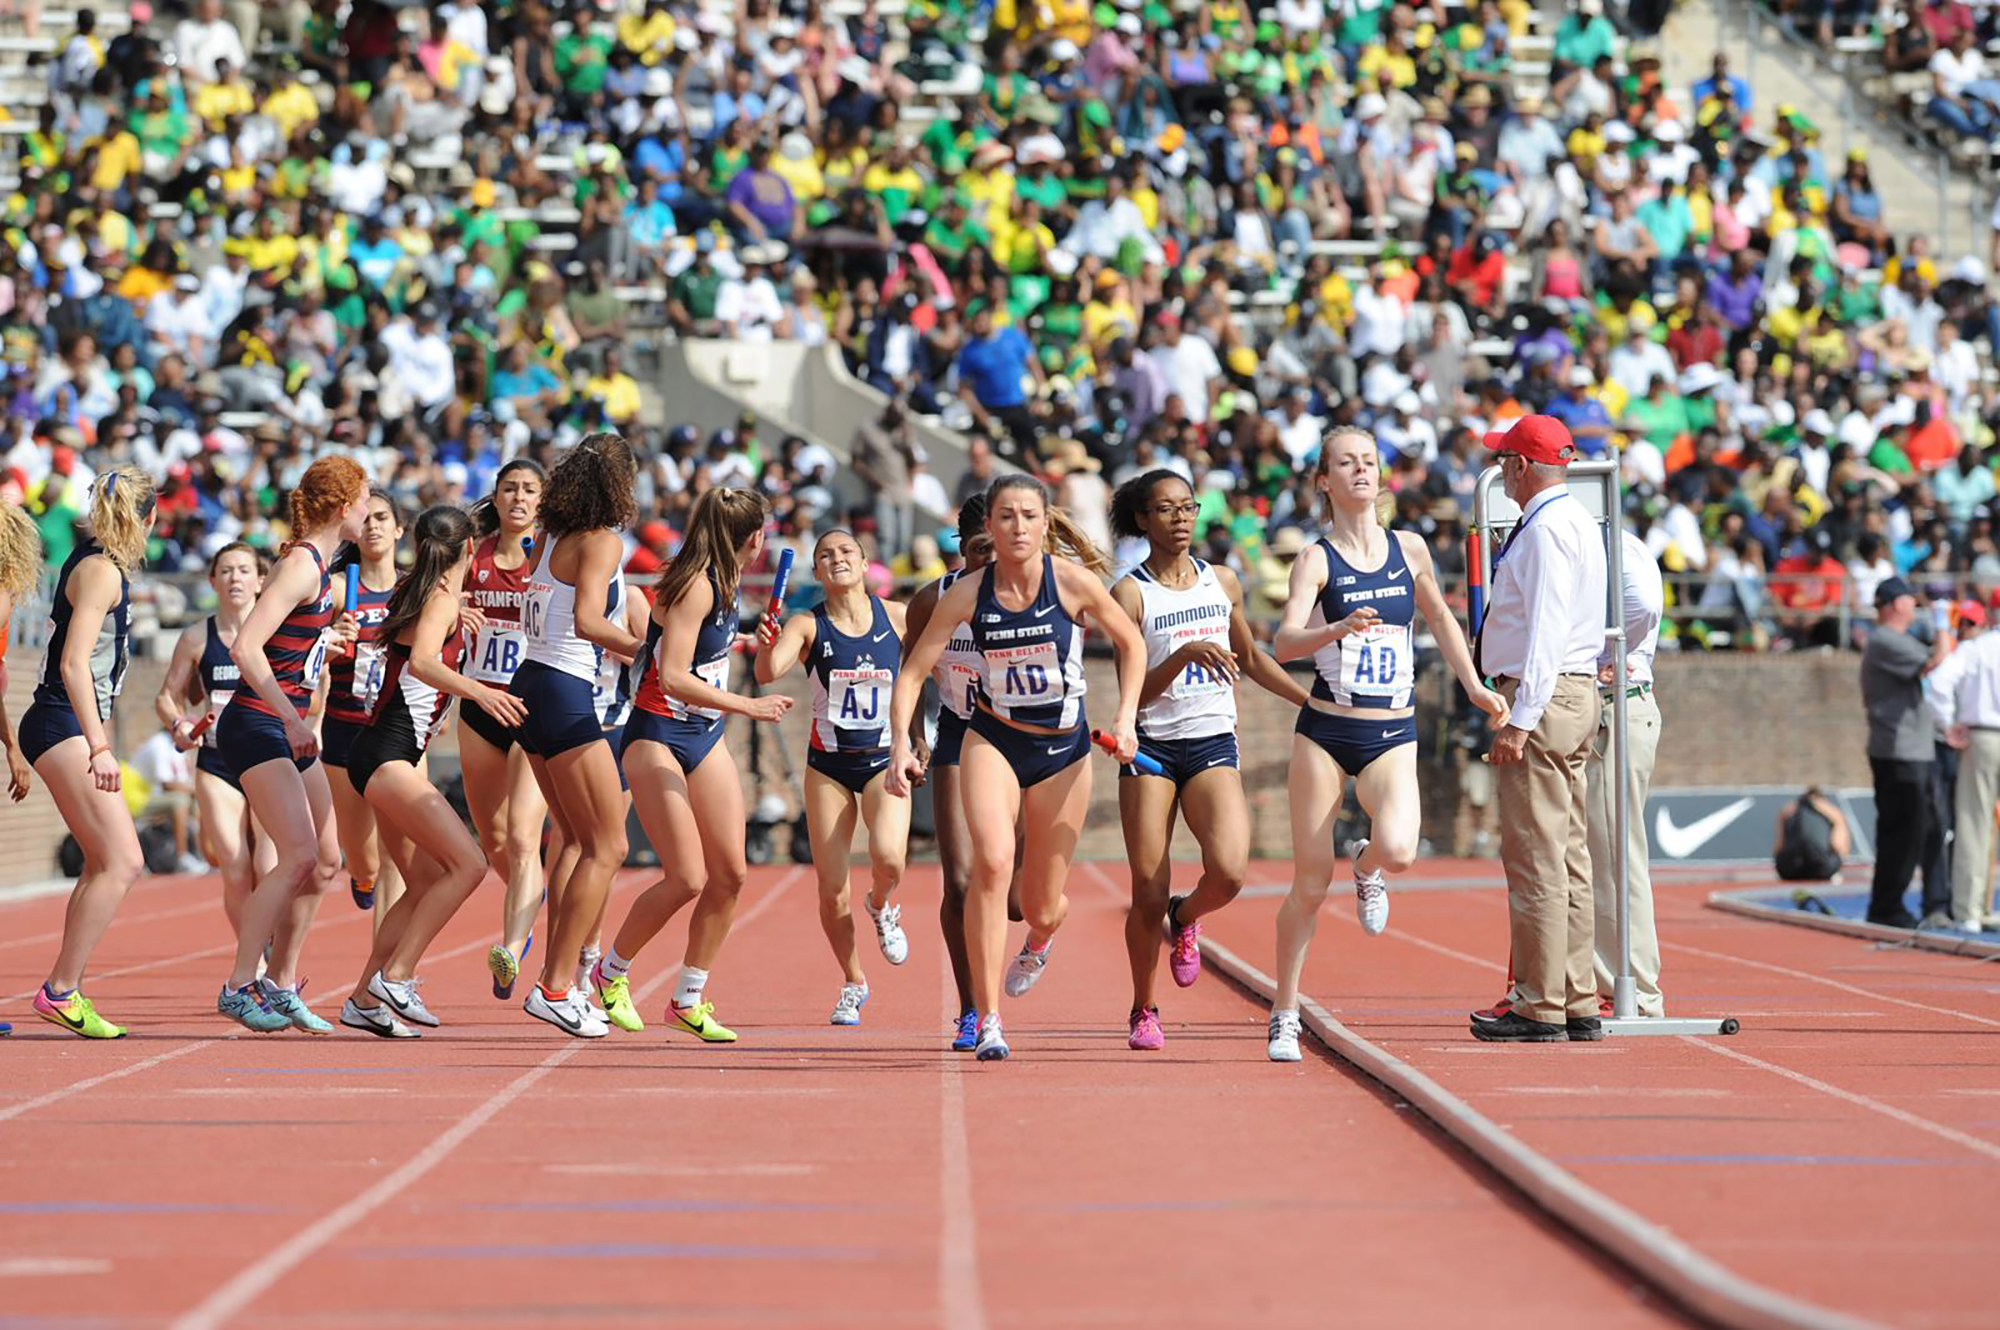 A group of women run a race at the Penn Relays.